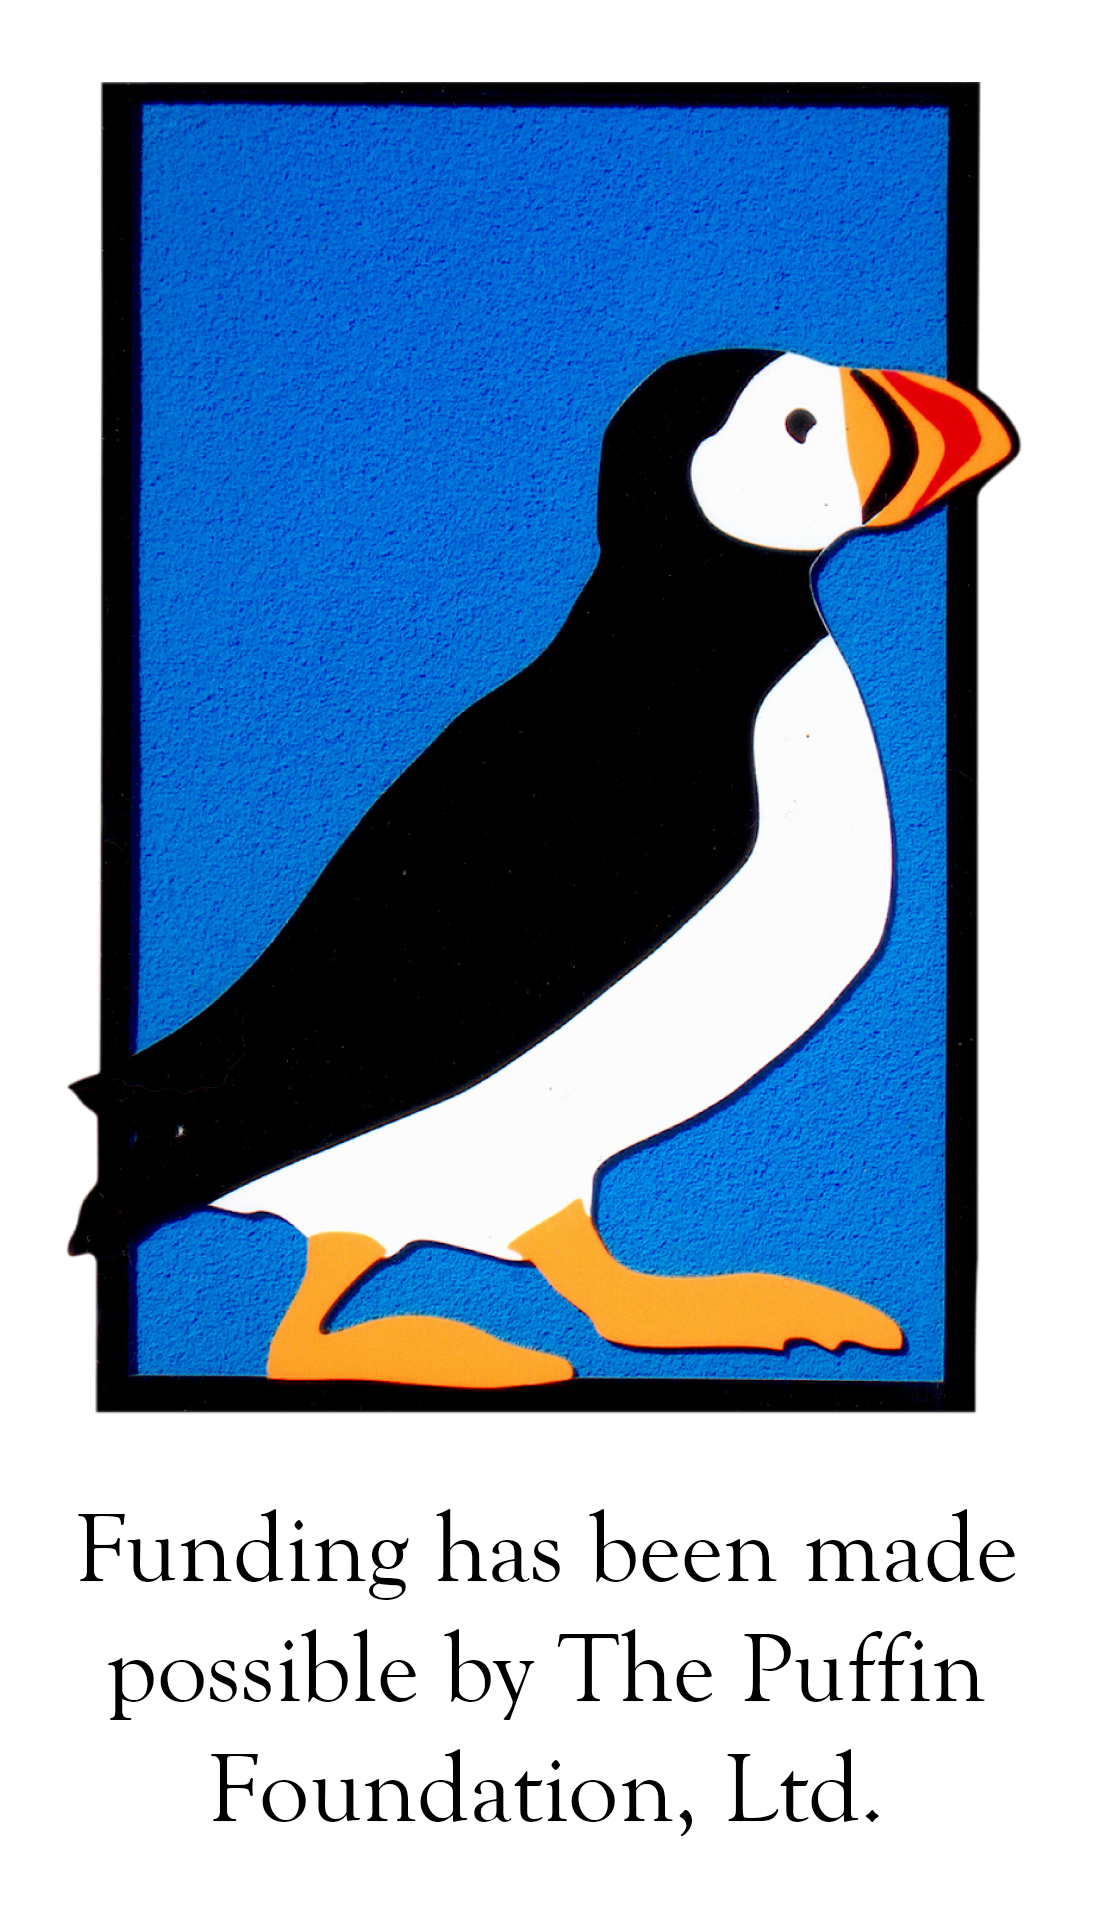 This funding has been made possible by The Puffin Foundation, Ltd.